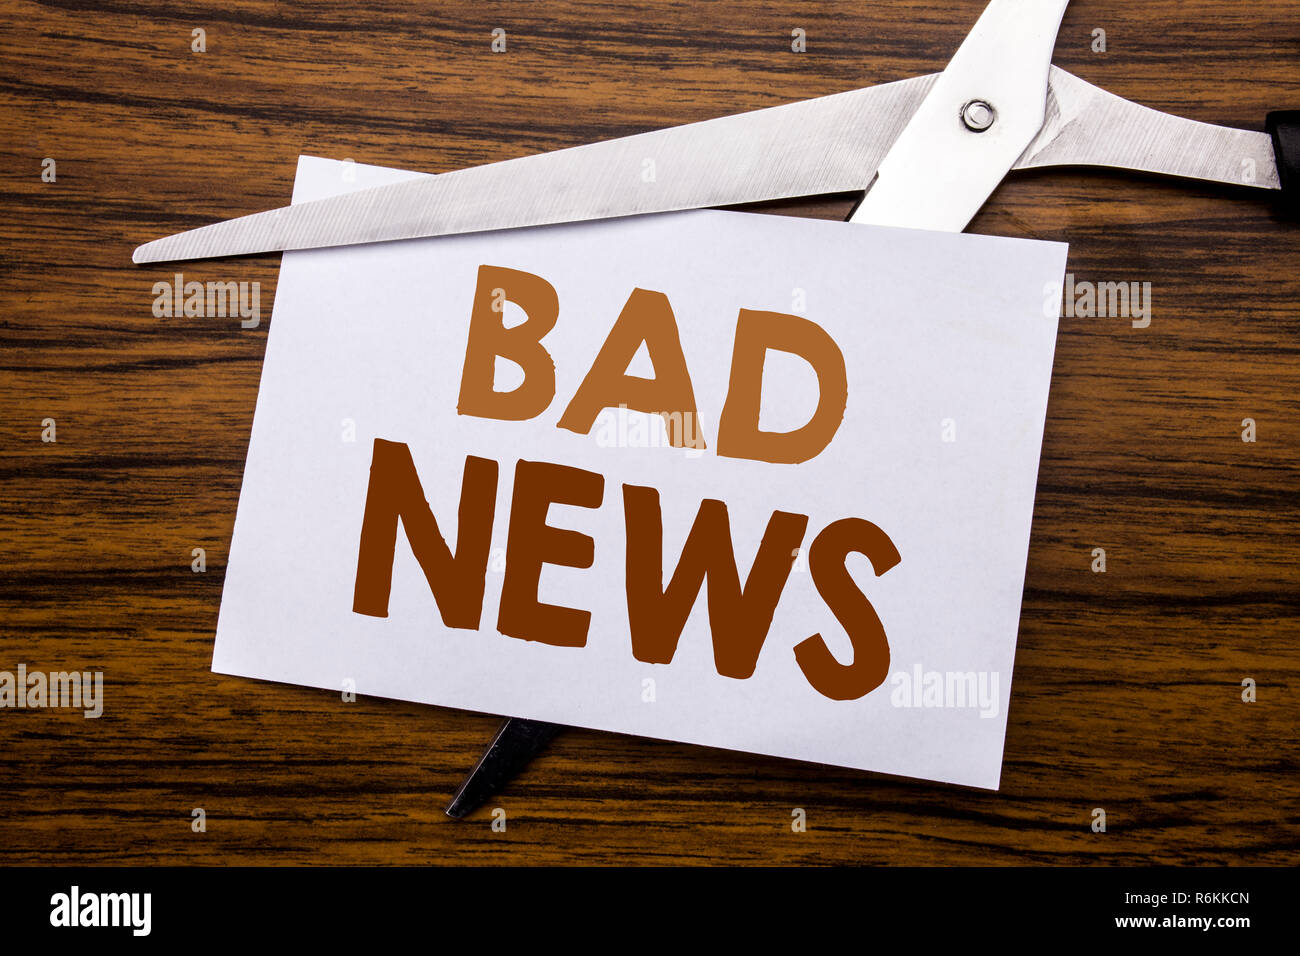 Hand writing text caption inspiration showing Bad News. Business concept for Failure Media Newspaper Written on note, wooden back with colourful scissors meaning destroy stop of something. Stock Photo